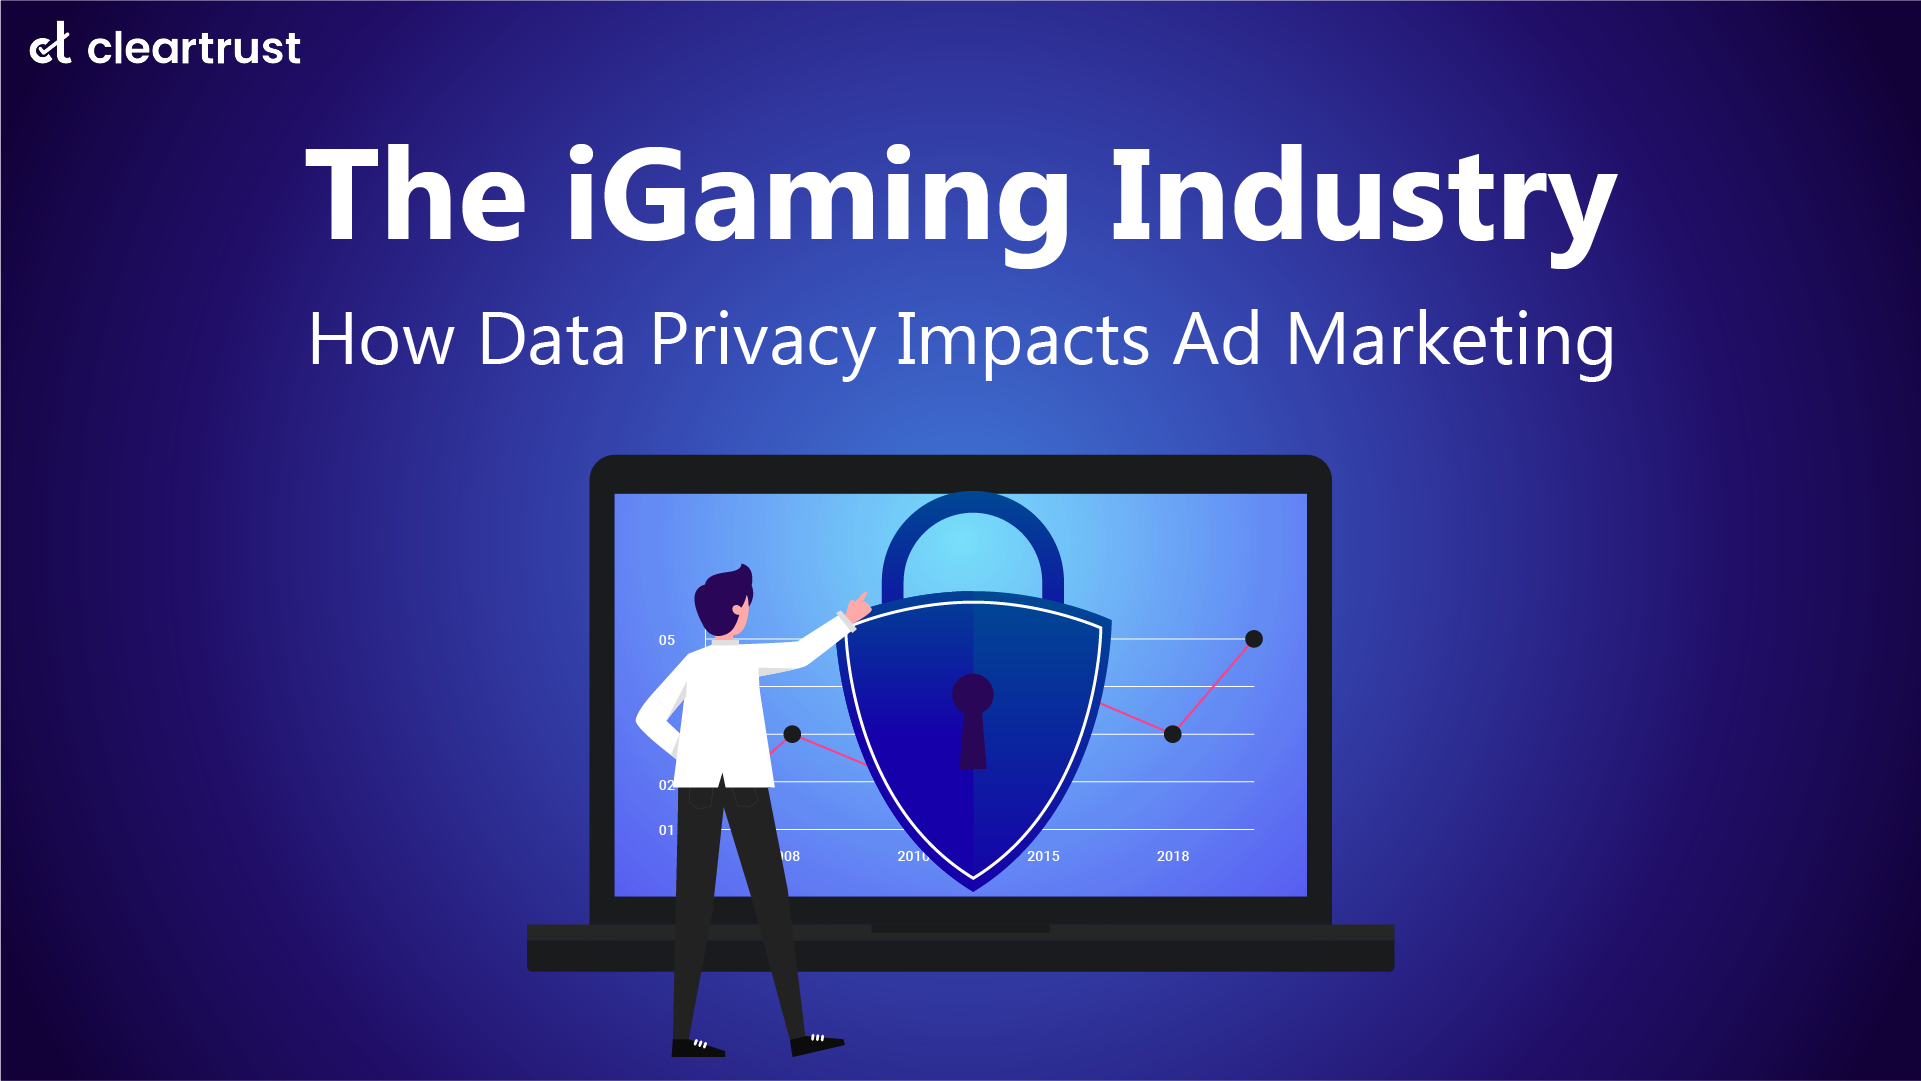 The iGaming Industry - How Data Privacy Impacts Ad Marketing